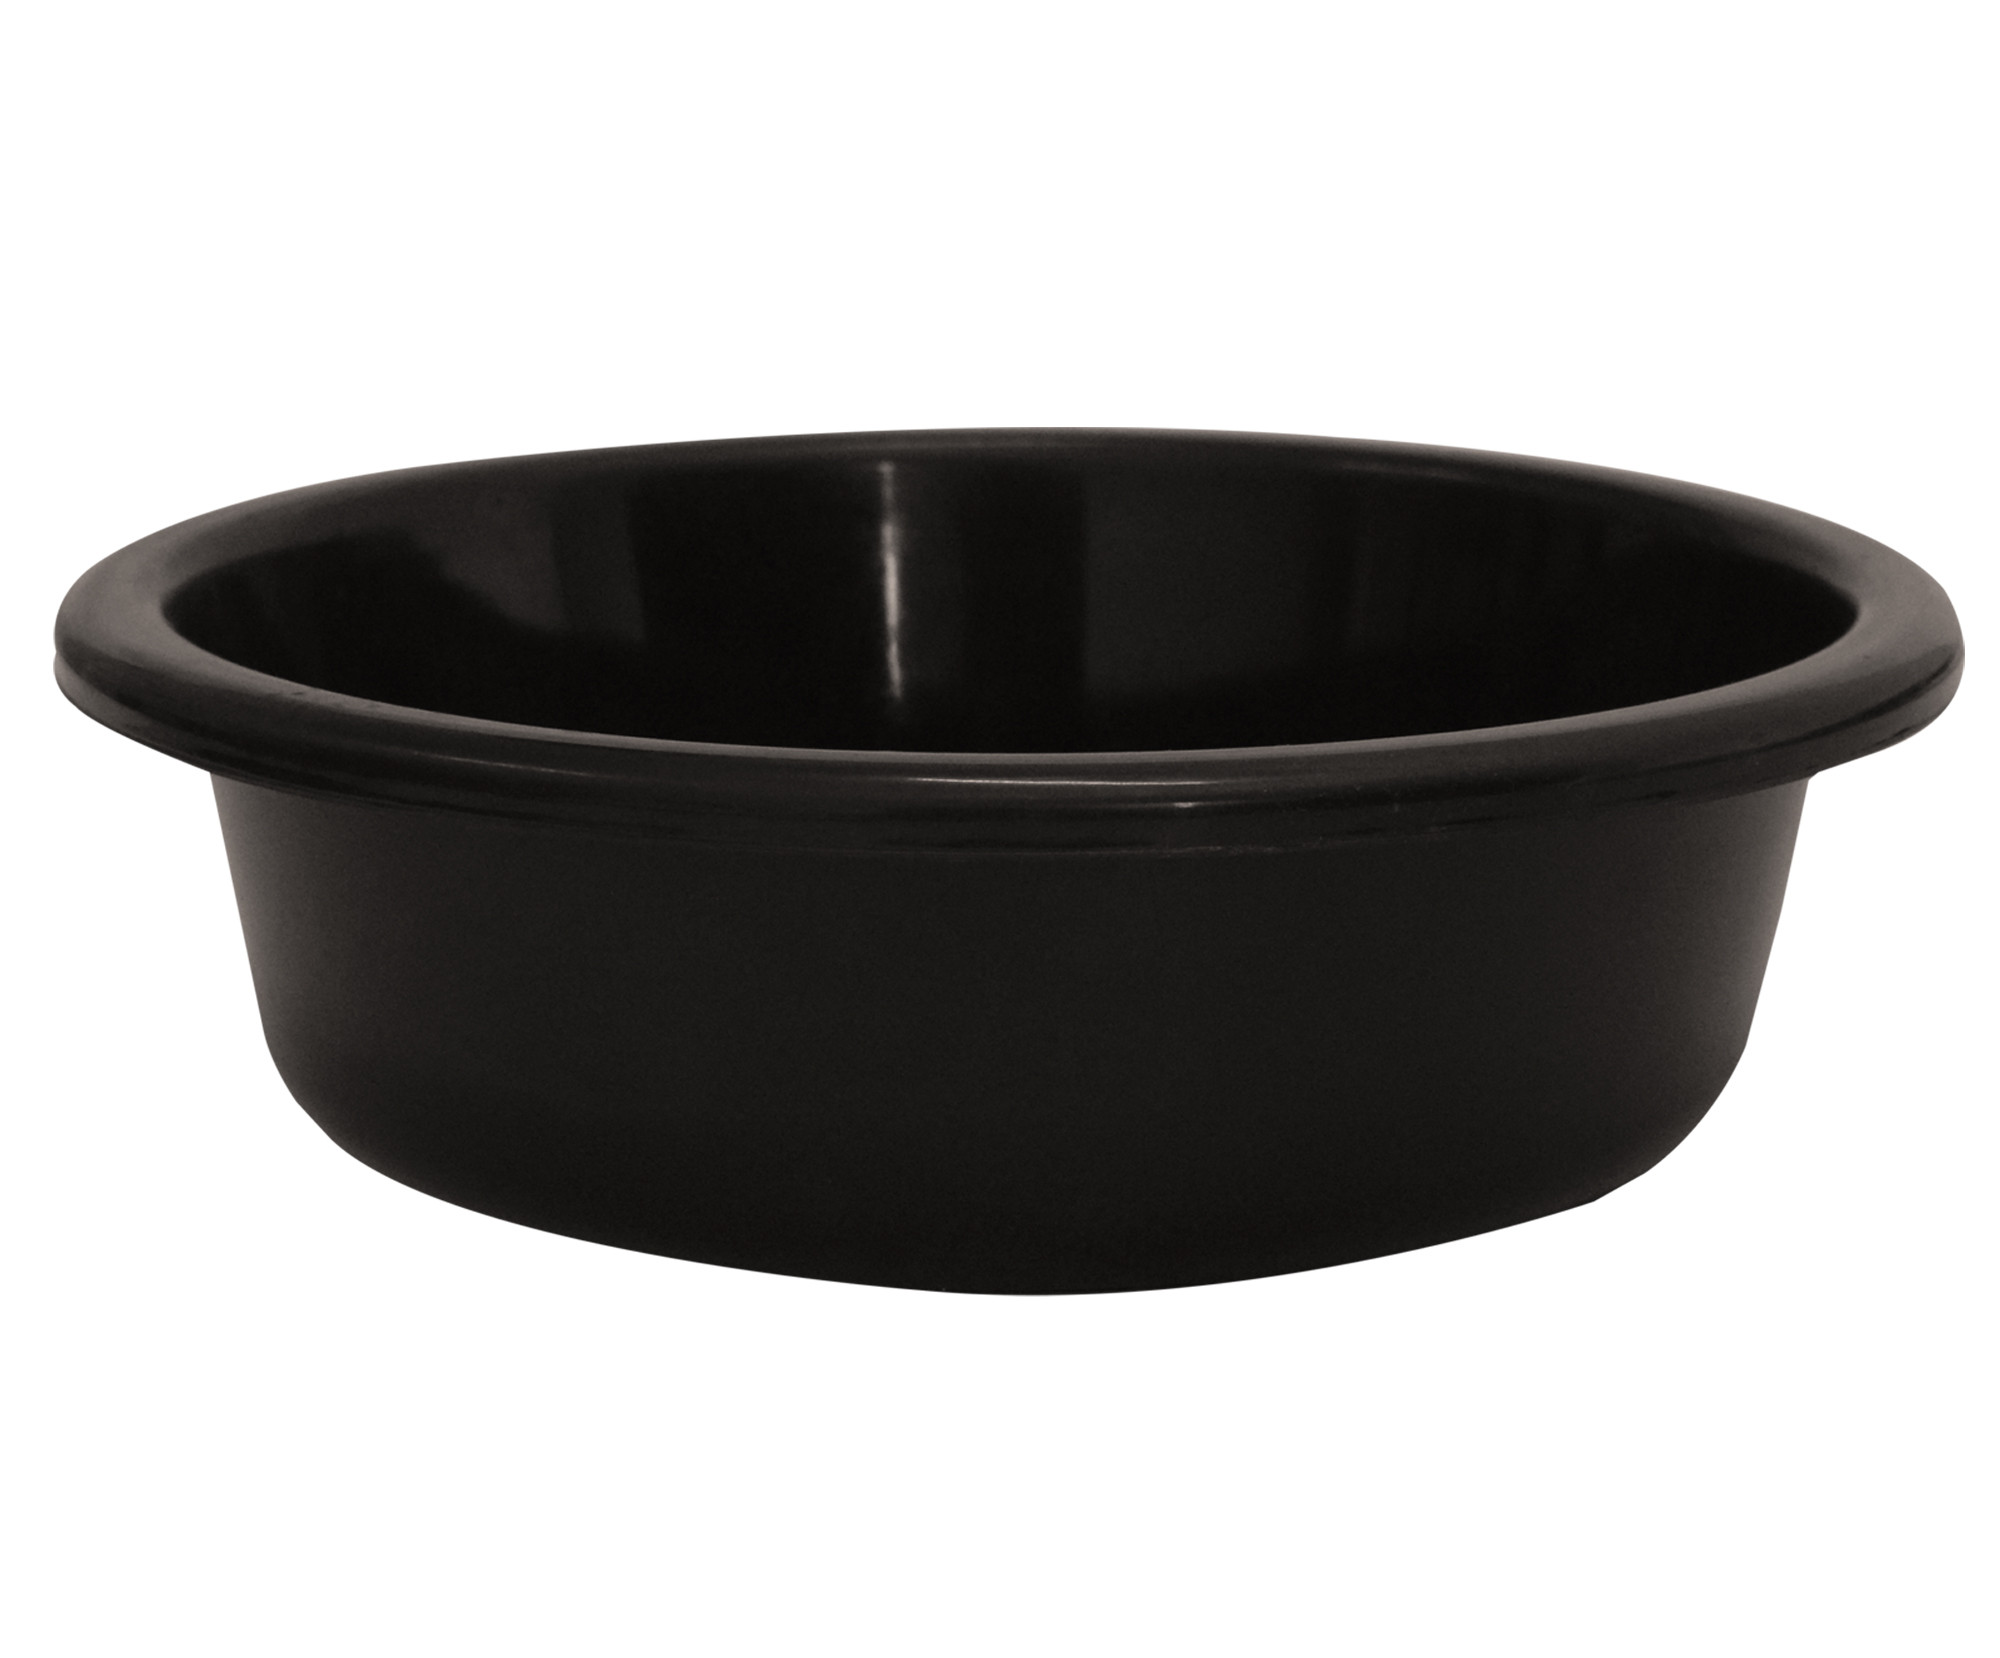 Kuber Industries Multiuses Unbreakable Plastic Knead Dough Basket/Basin Bowl For Home & Kitchen 6 Ltr- Pack of 2 (Black & Red)